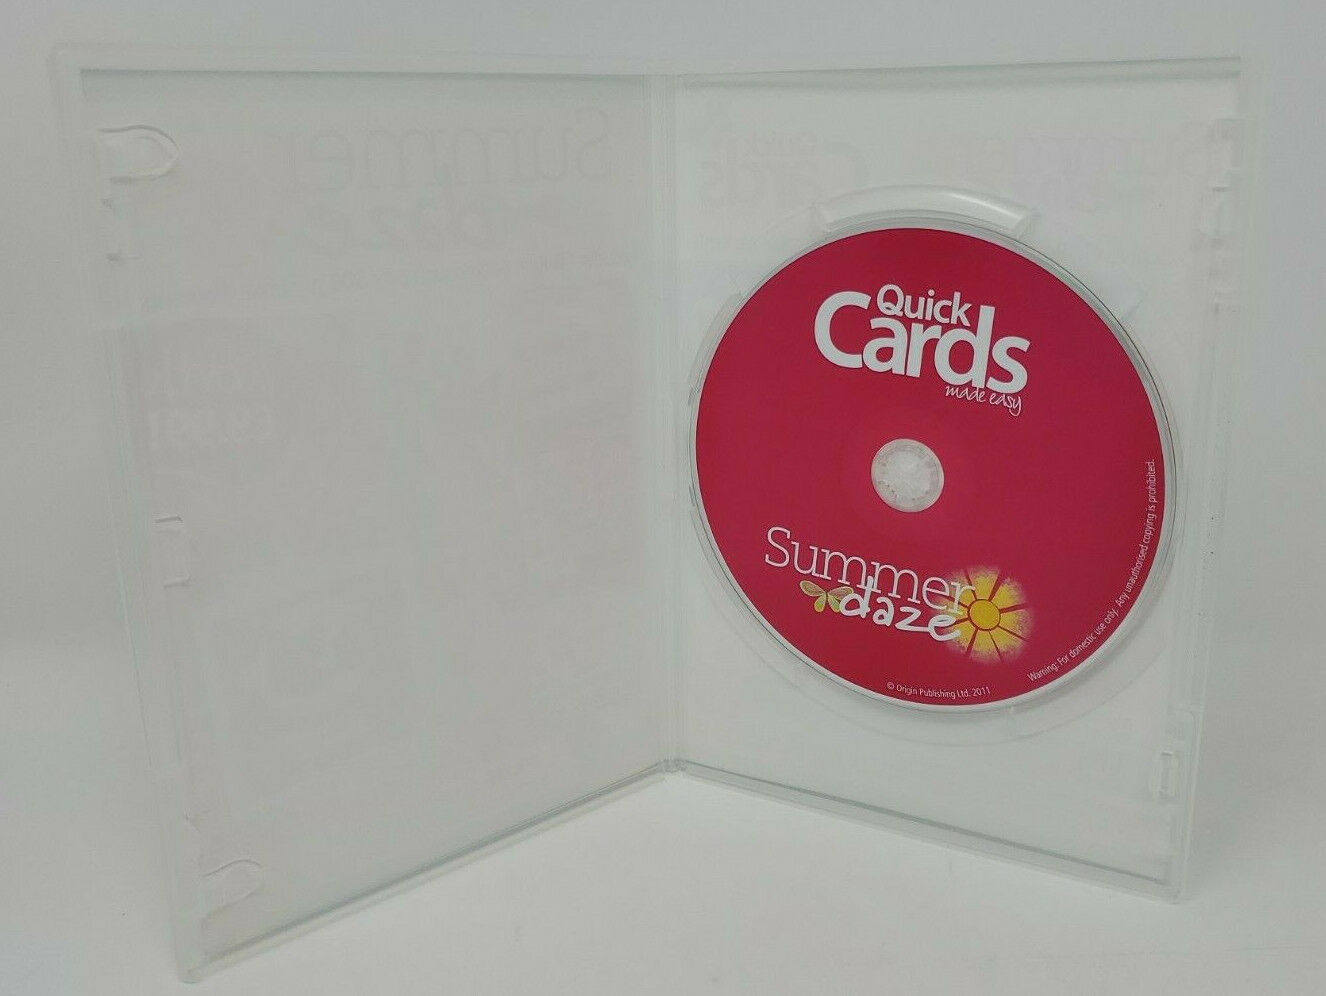 Lot of 2 Cardmaking CD ROMs - PC/MAC - Summer Daze and Complete Cardmaking 2011 Unbranded - фотография #4